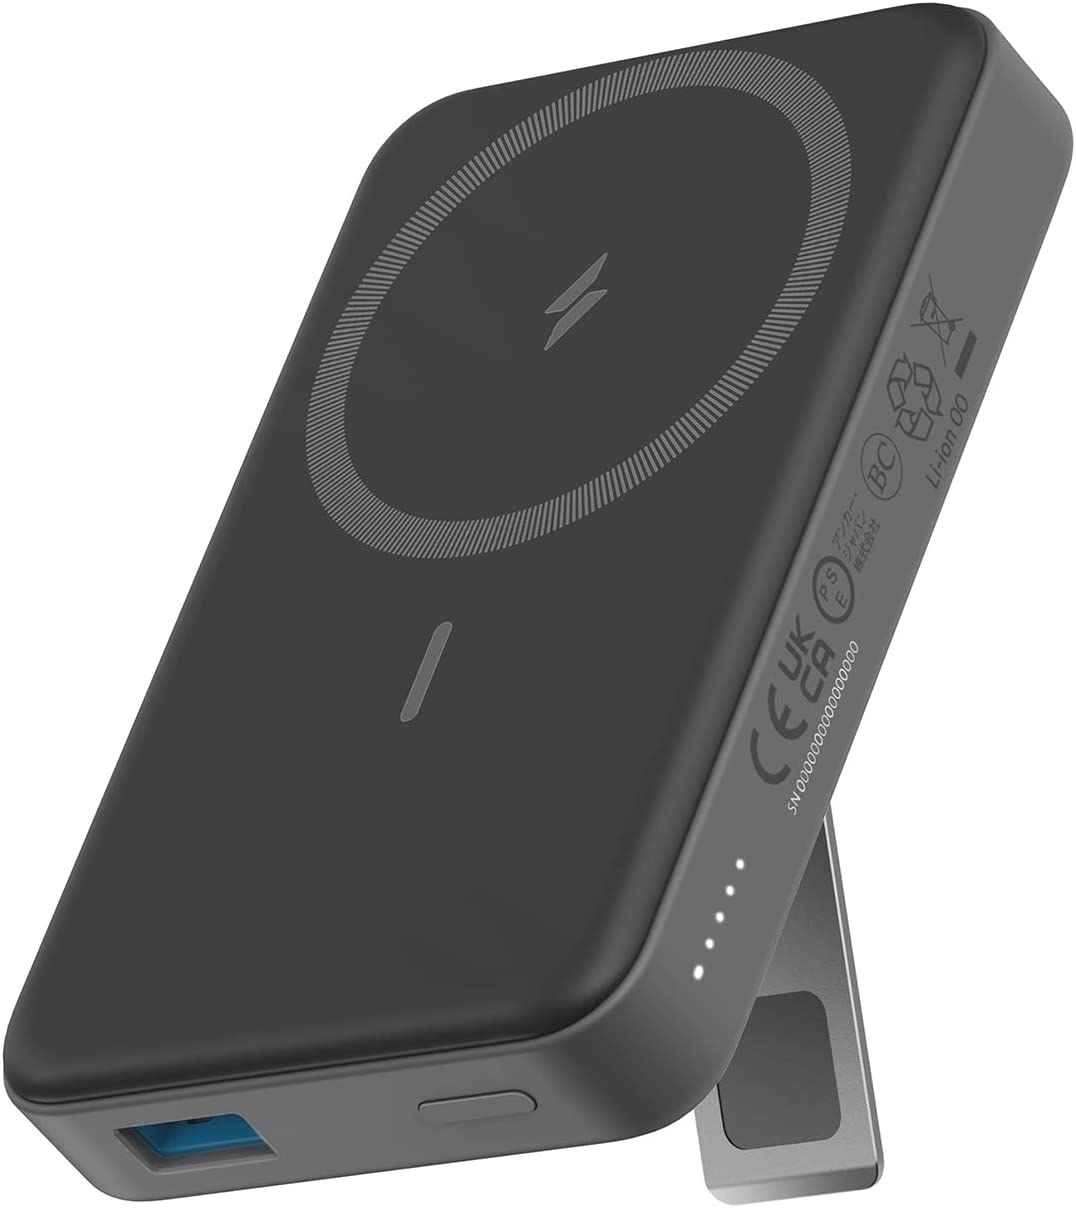 Anker 633 Magnetic Battery (MagGo) 10000mAh 2-in-1 Foldable Wireless Portable Charger with 20W USB-C Port for iPhone 13/12,Black - image 1 of 7